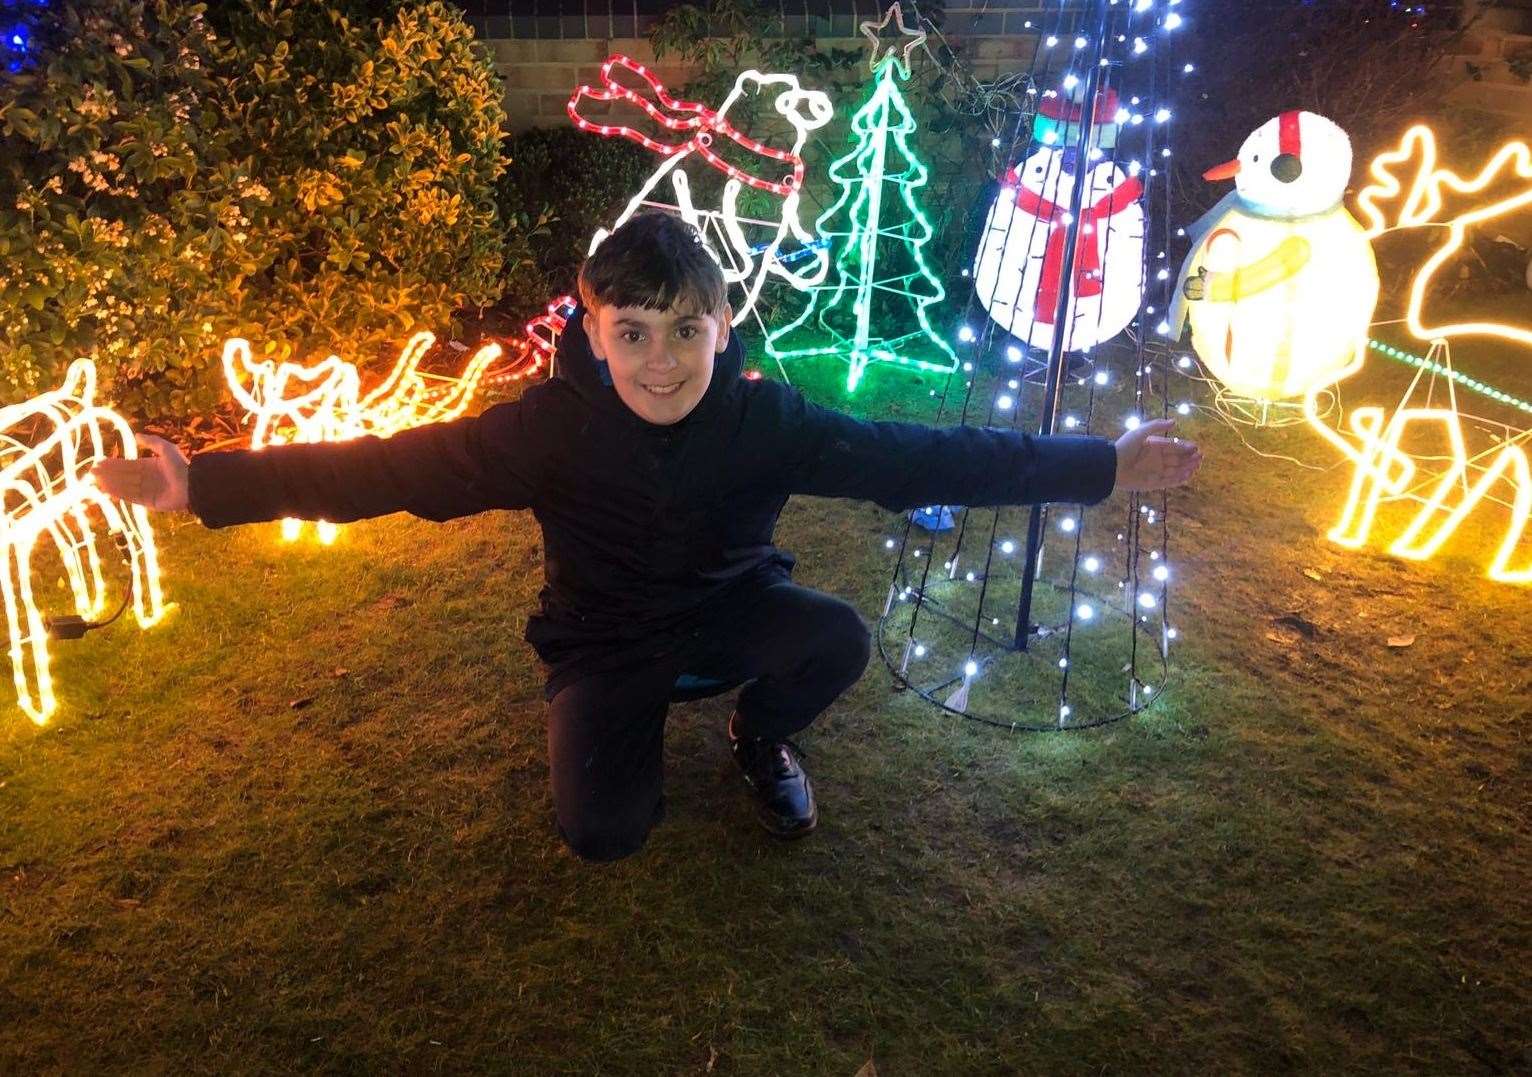 Callum Dunne with his Christmas light display in Maidstone, two years ago